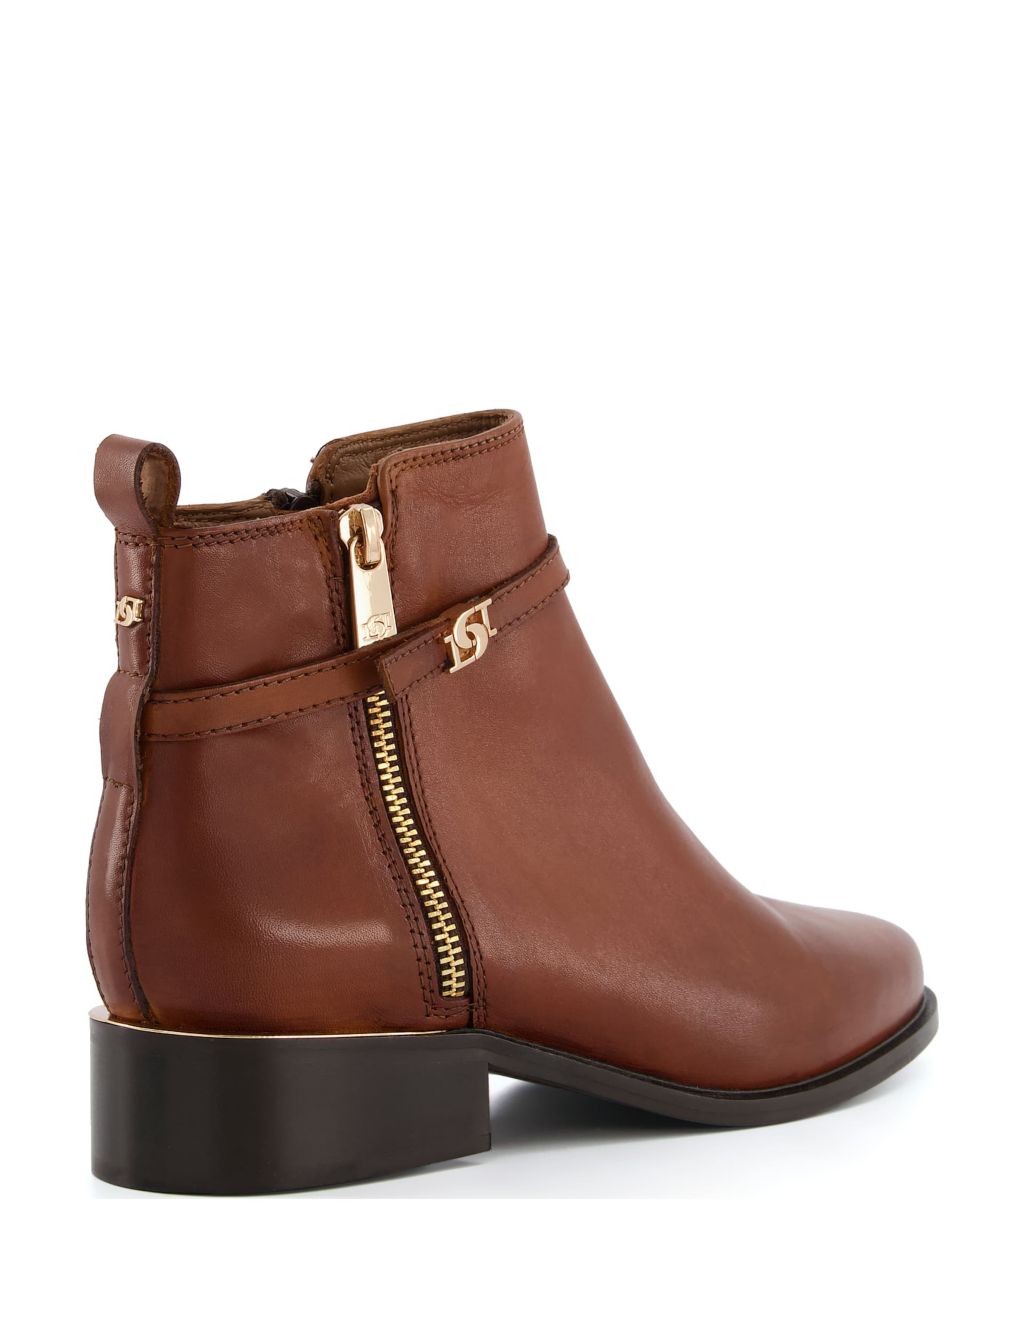 Leather Buckle Flat Ankle Boots image 4